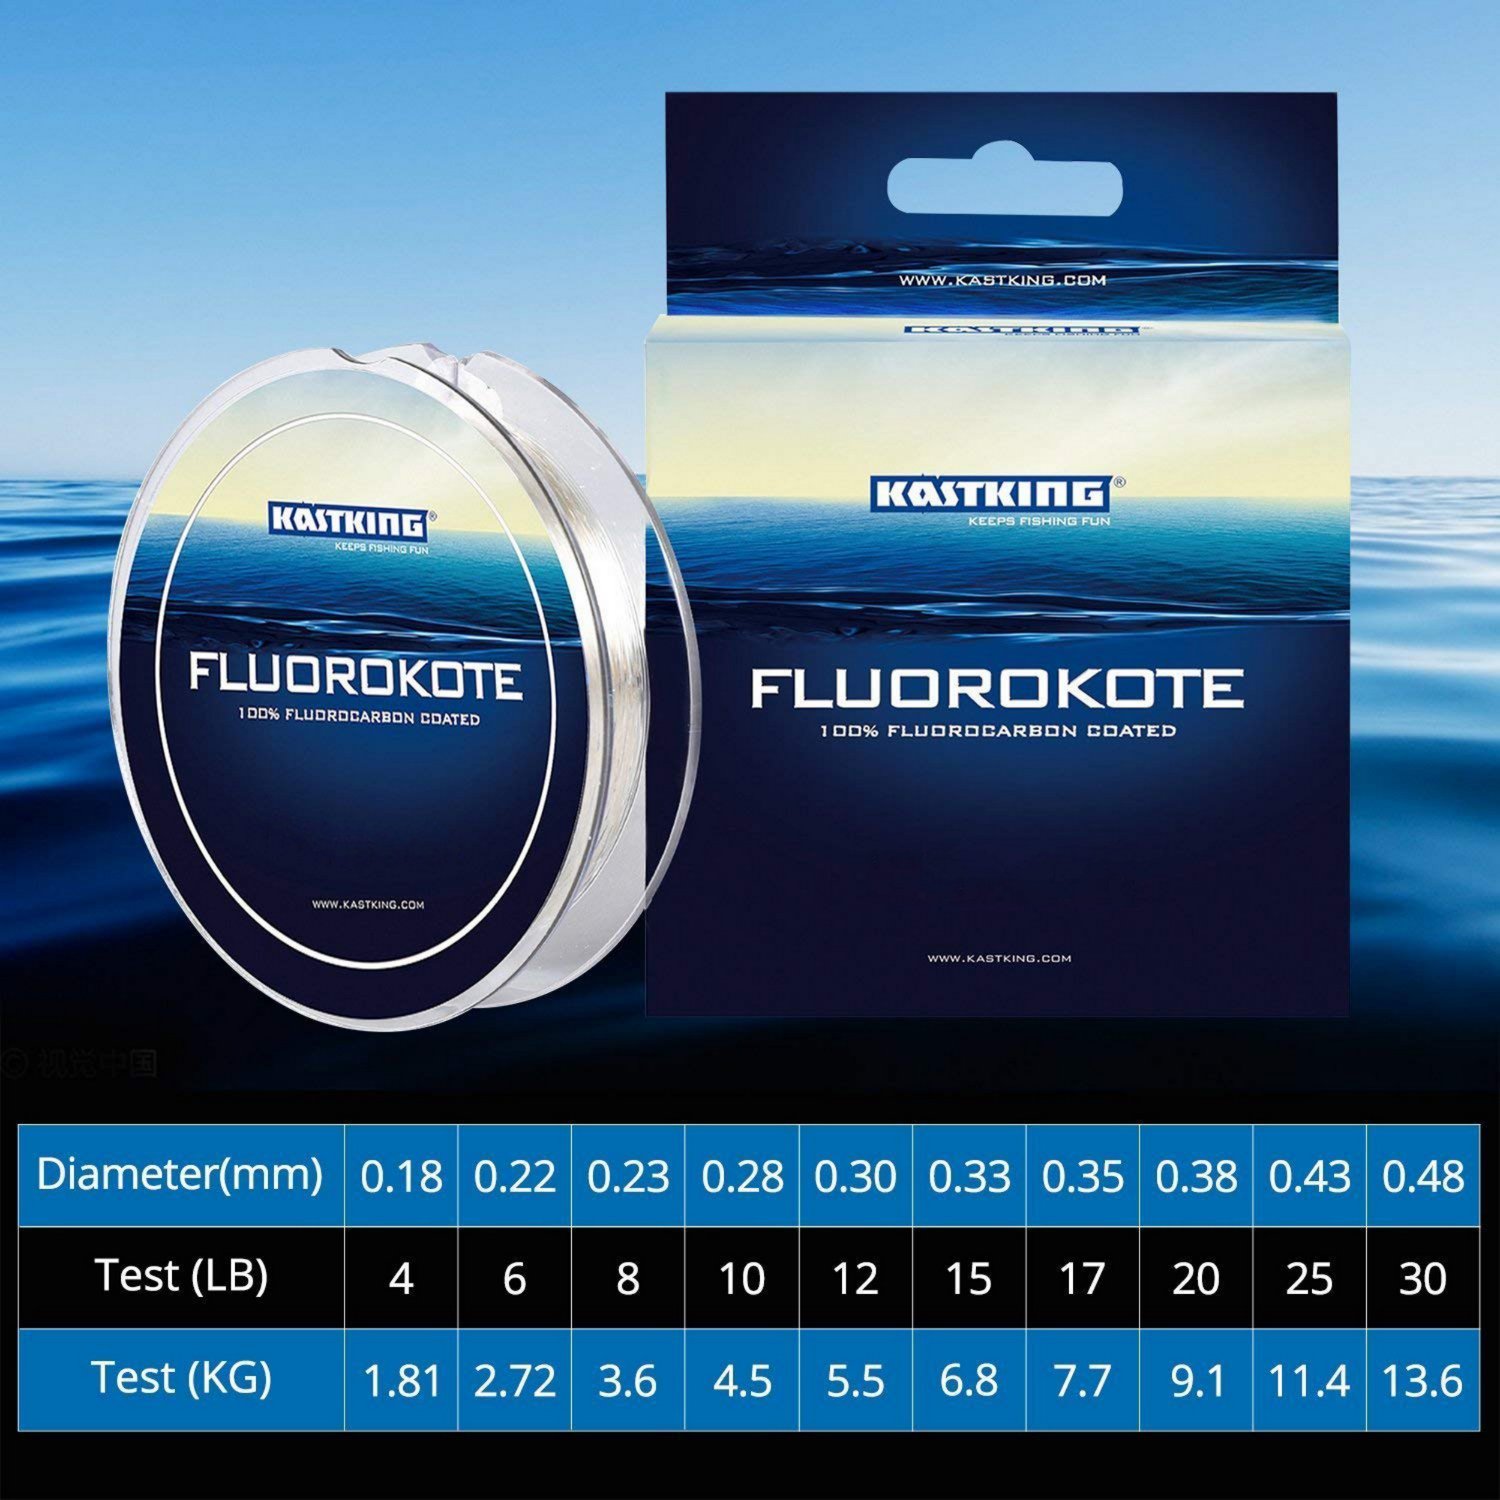 KastKing Fluorokote Fishing Line Clear, 8 lbs - Fishing Lines at Academy Sports